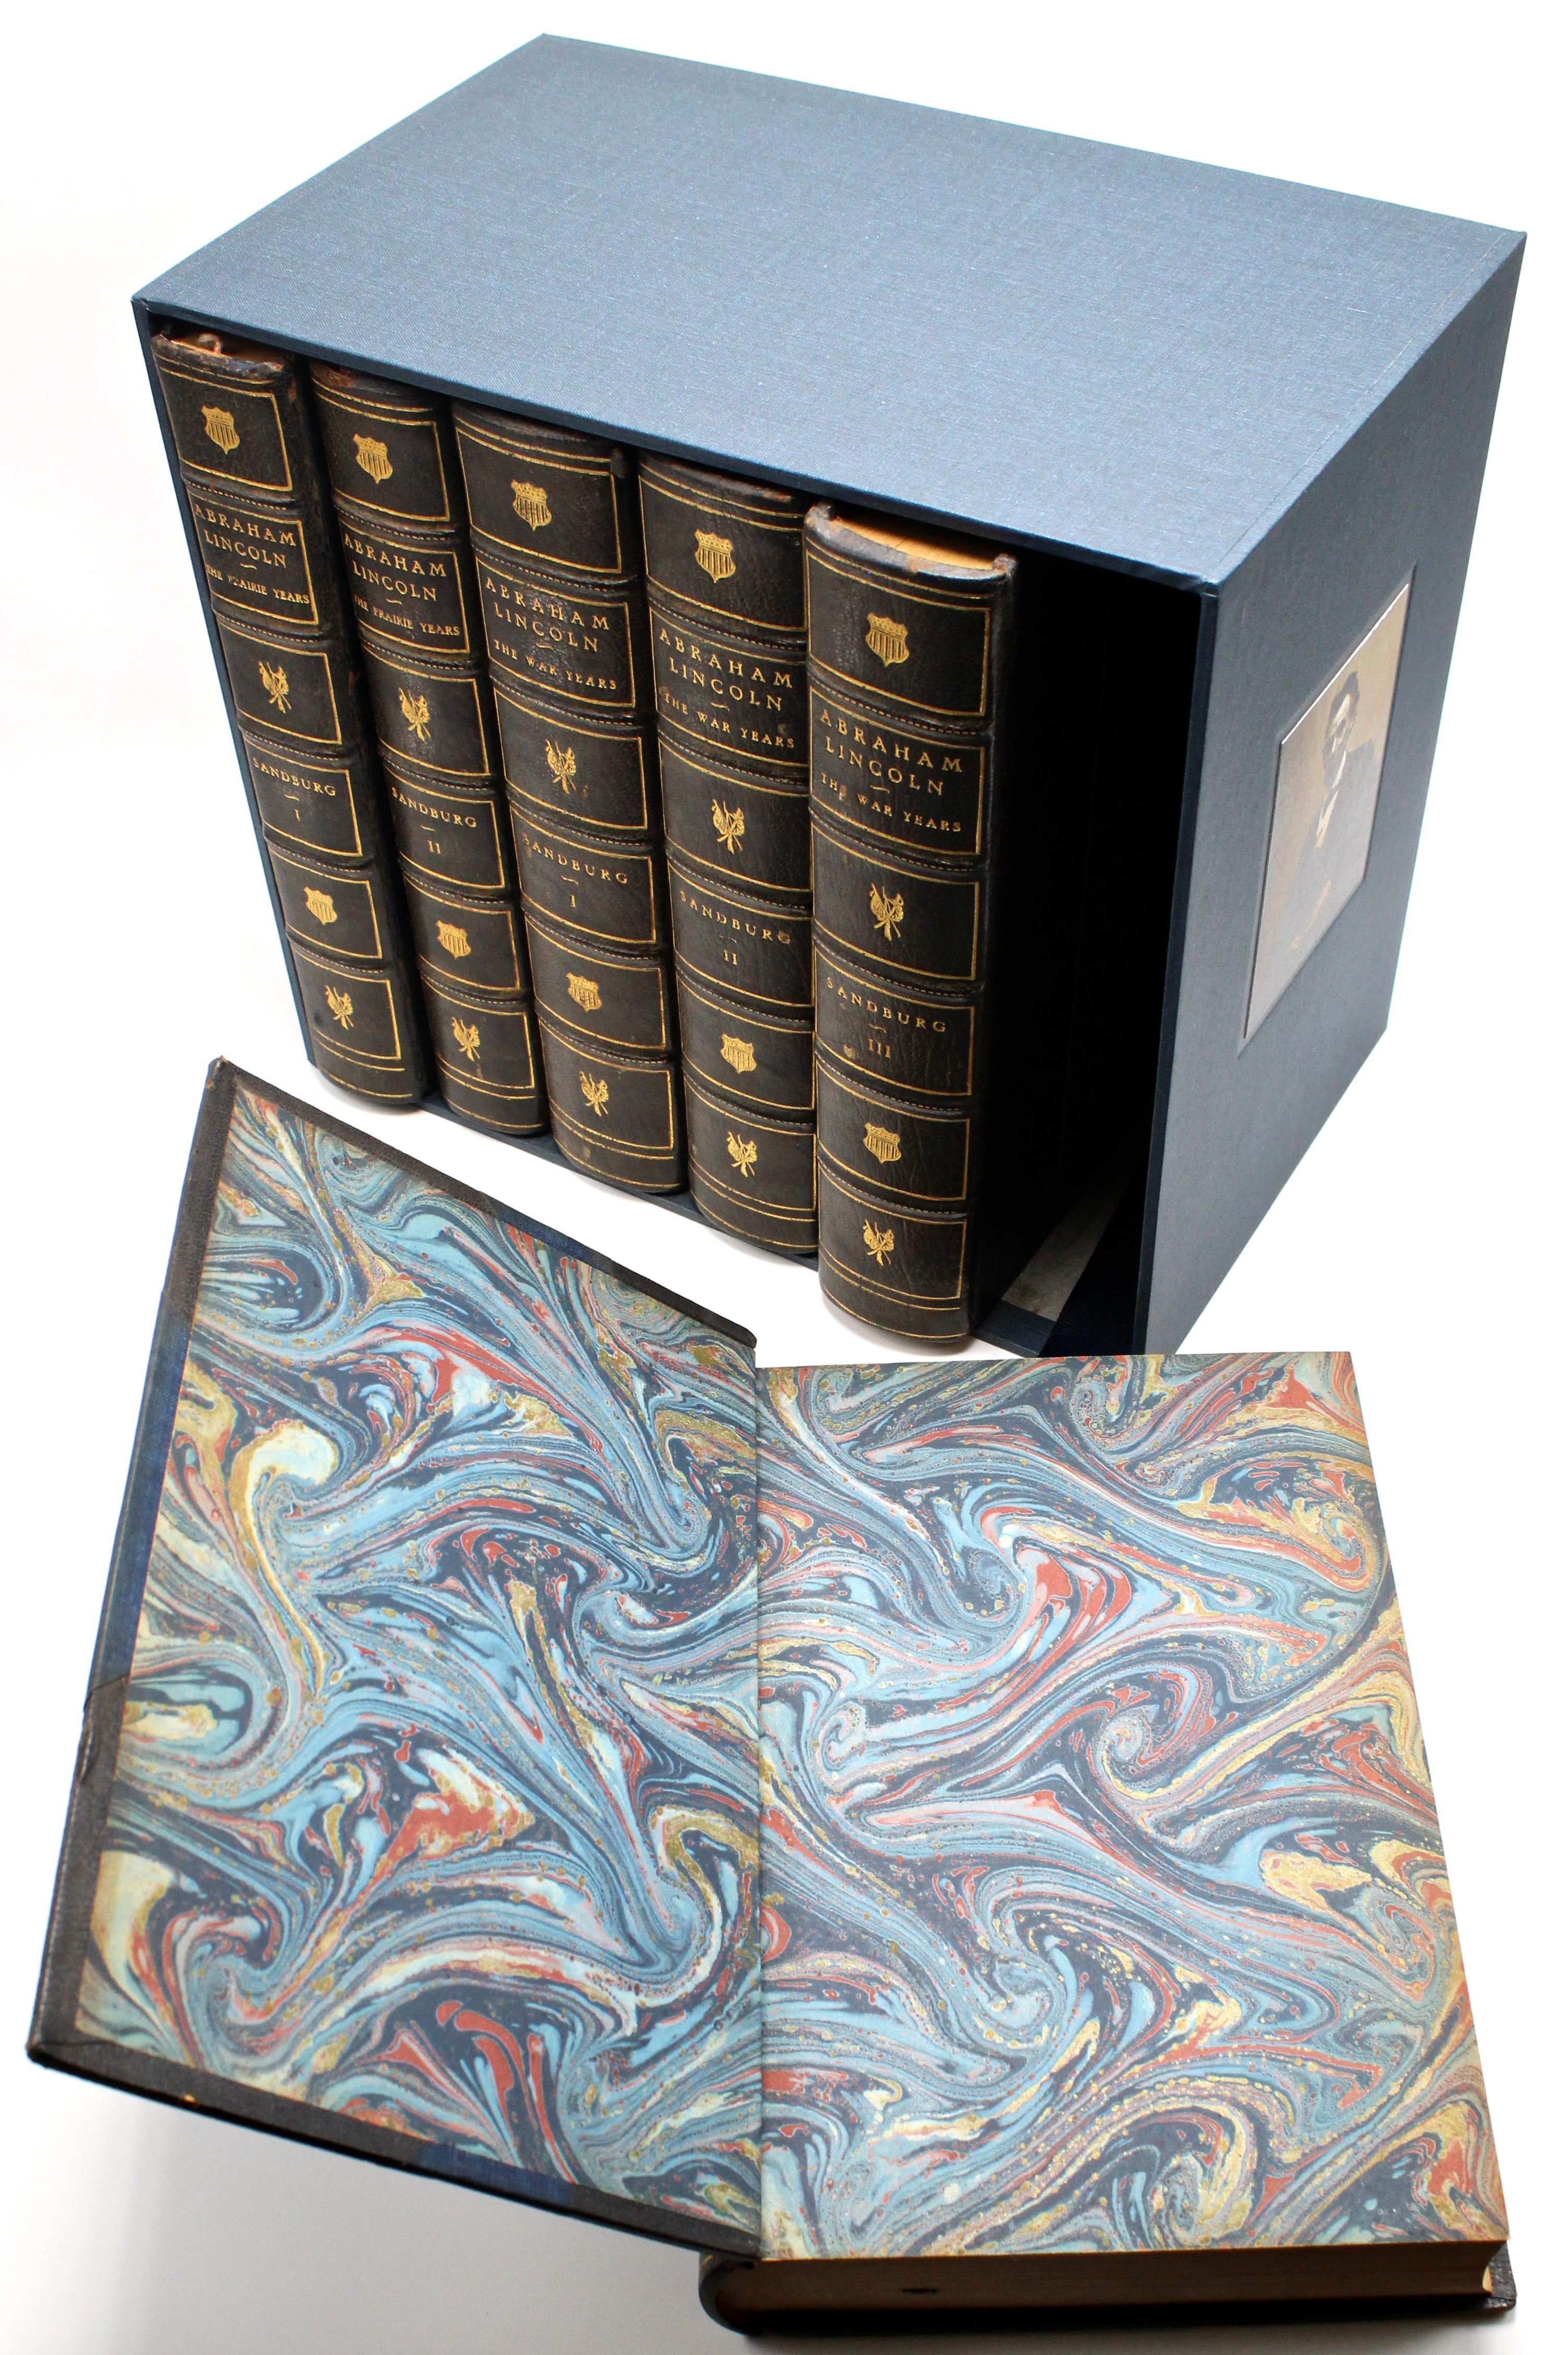 Sandburg, Carl. Abraham Lincoln: The Prairie Years and Abraham Lincoln: The War Years. New York: Harcourt, Brace & World, Inc., 1926 and 1939. Signed by Sandburg in Volume I, First Edition sets. Custom matching slipcase.

Presented is the combined